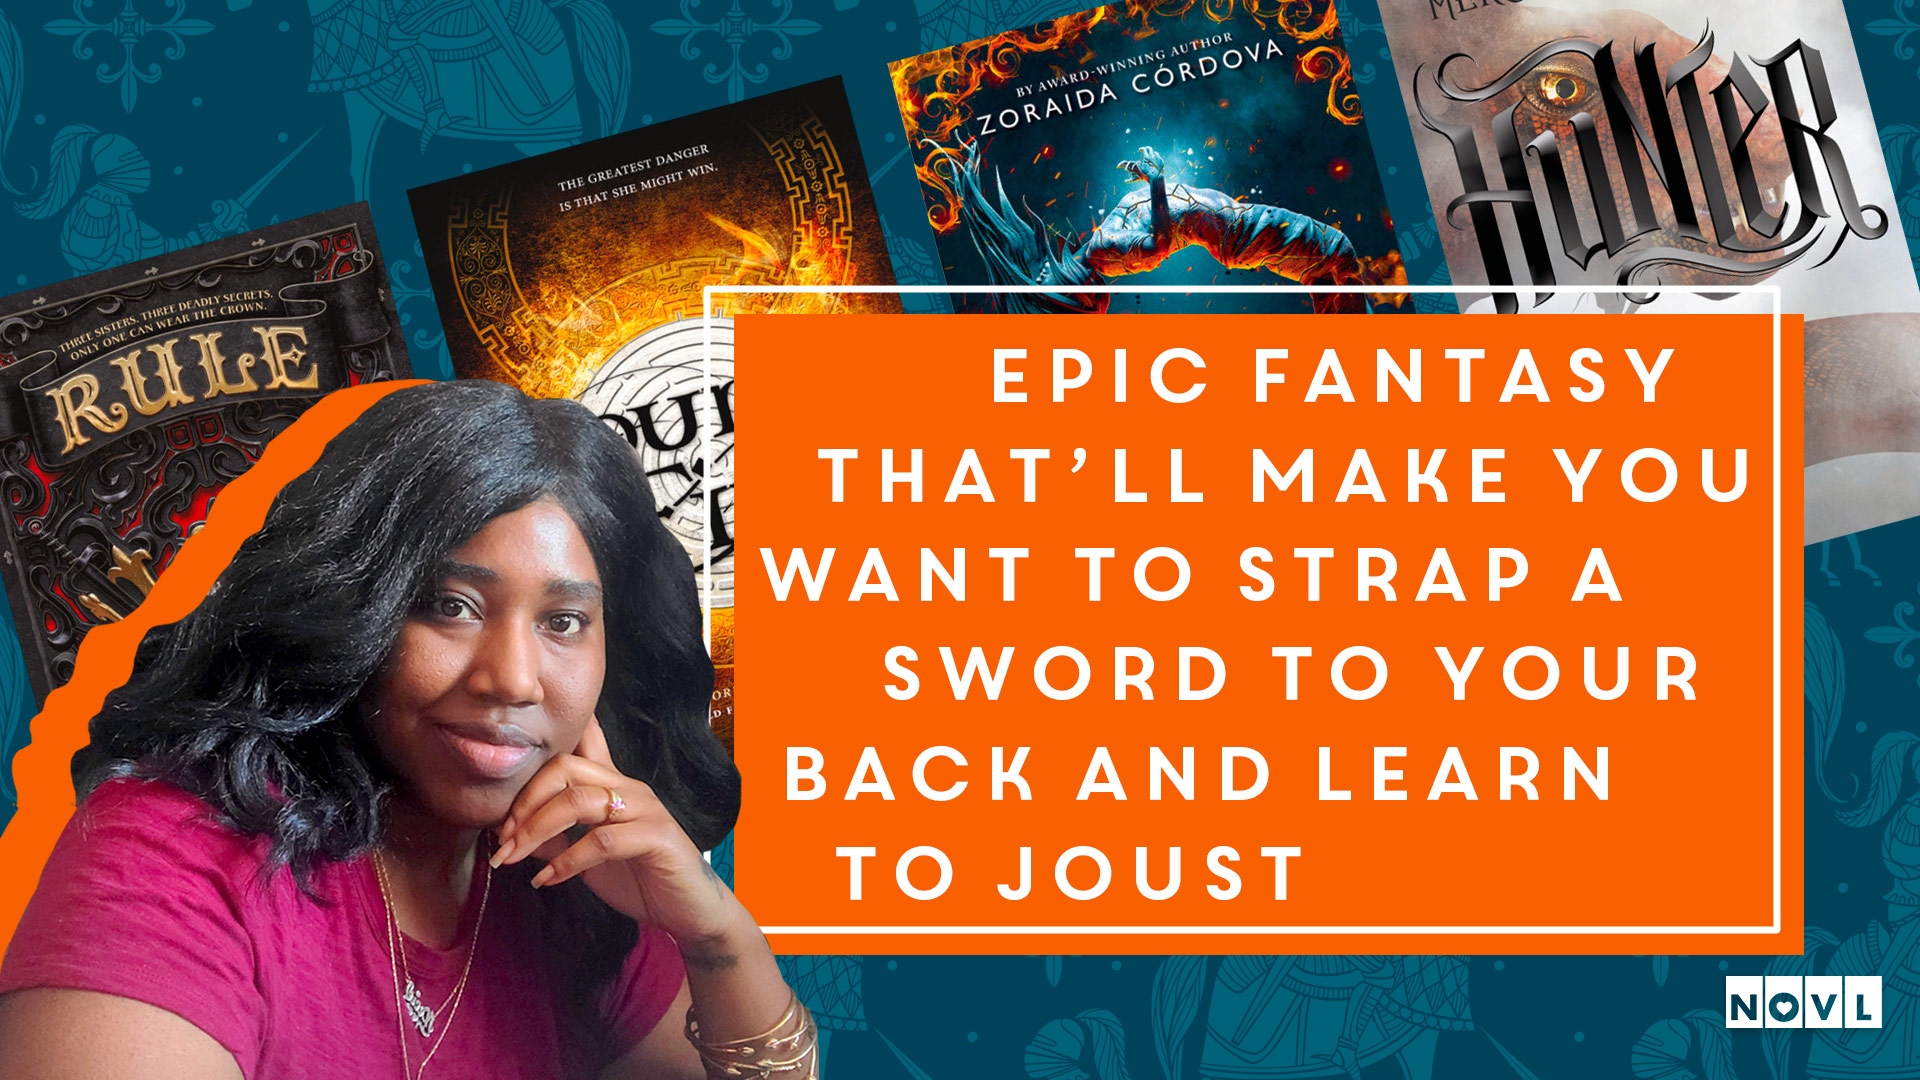 The NOVL Blog, Featured Image for Article: Epic fantasy that'll make you want to strap a sword to your back and learn to joust